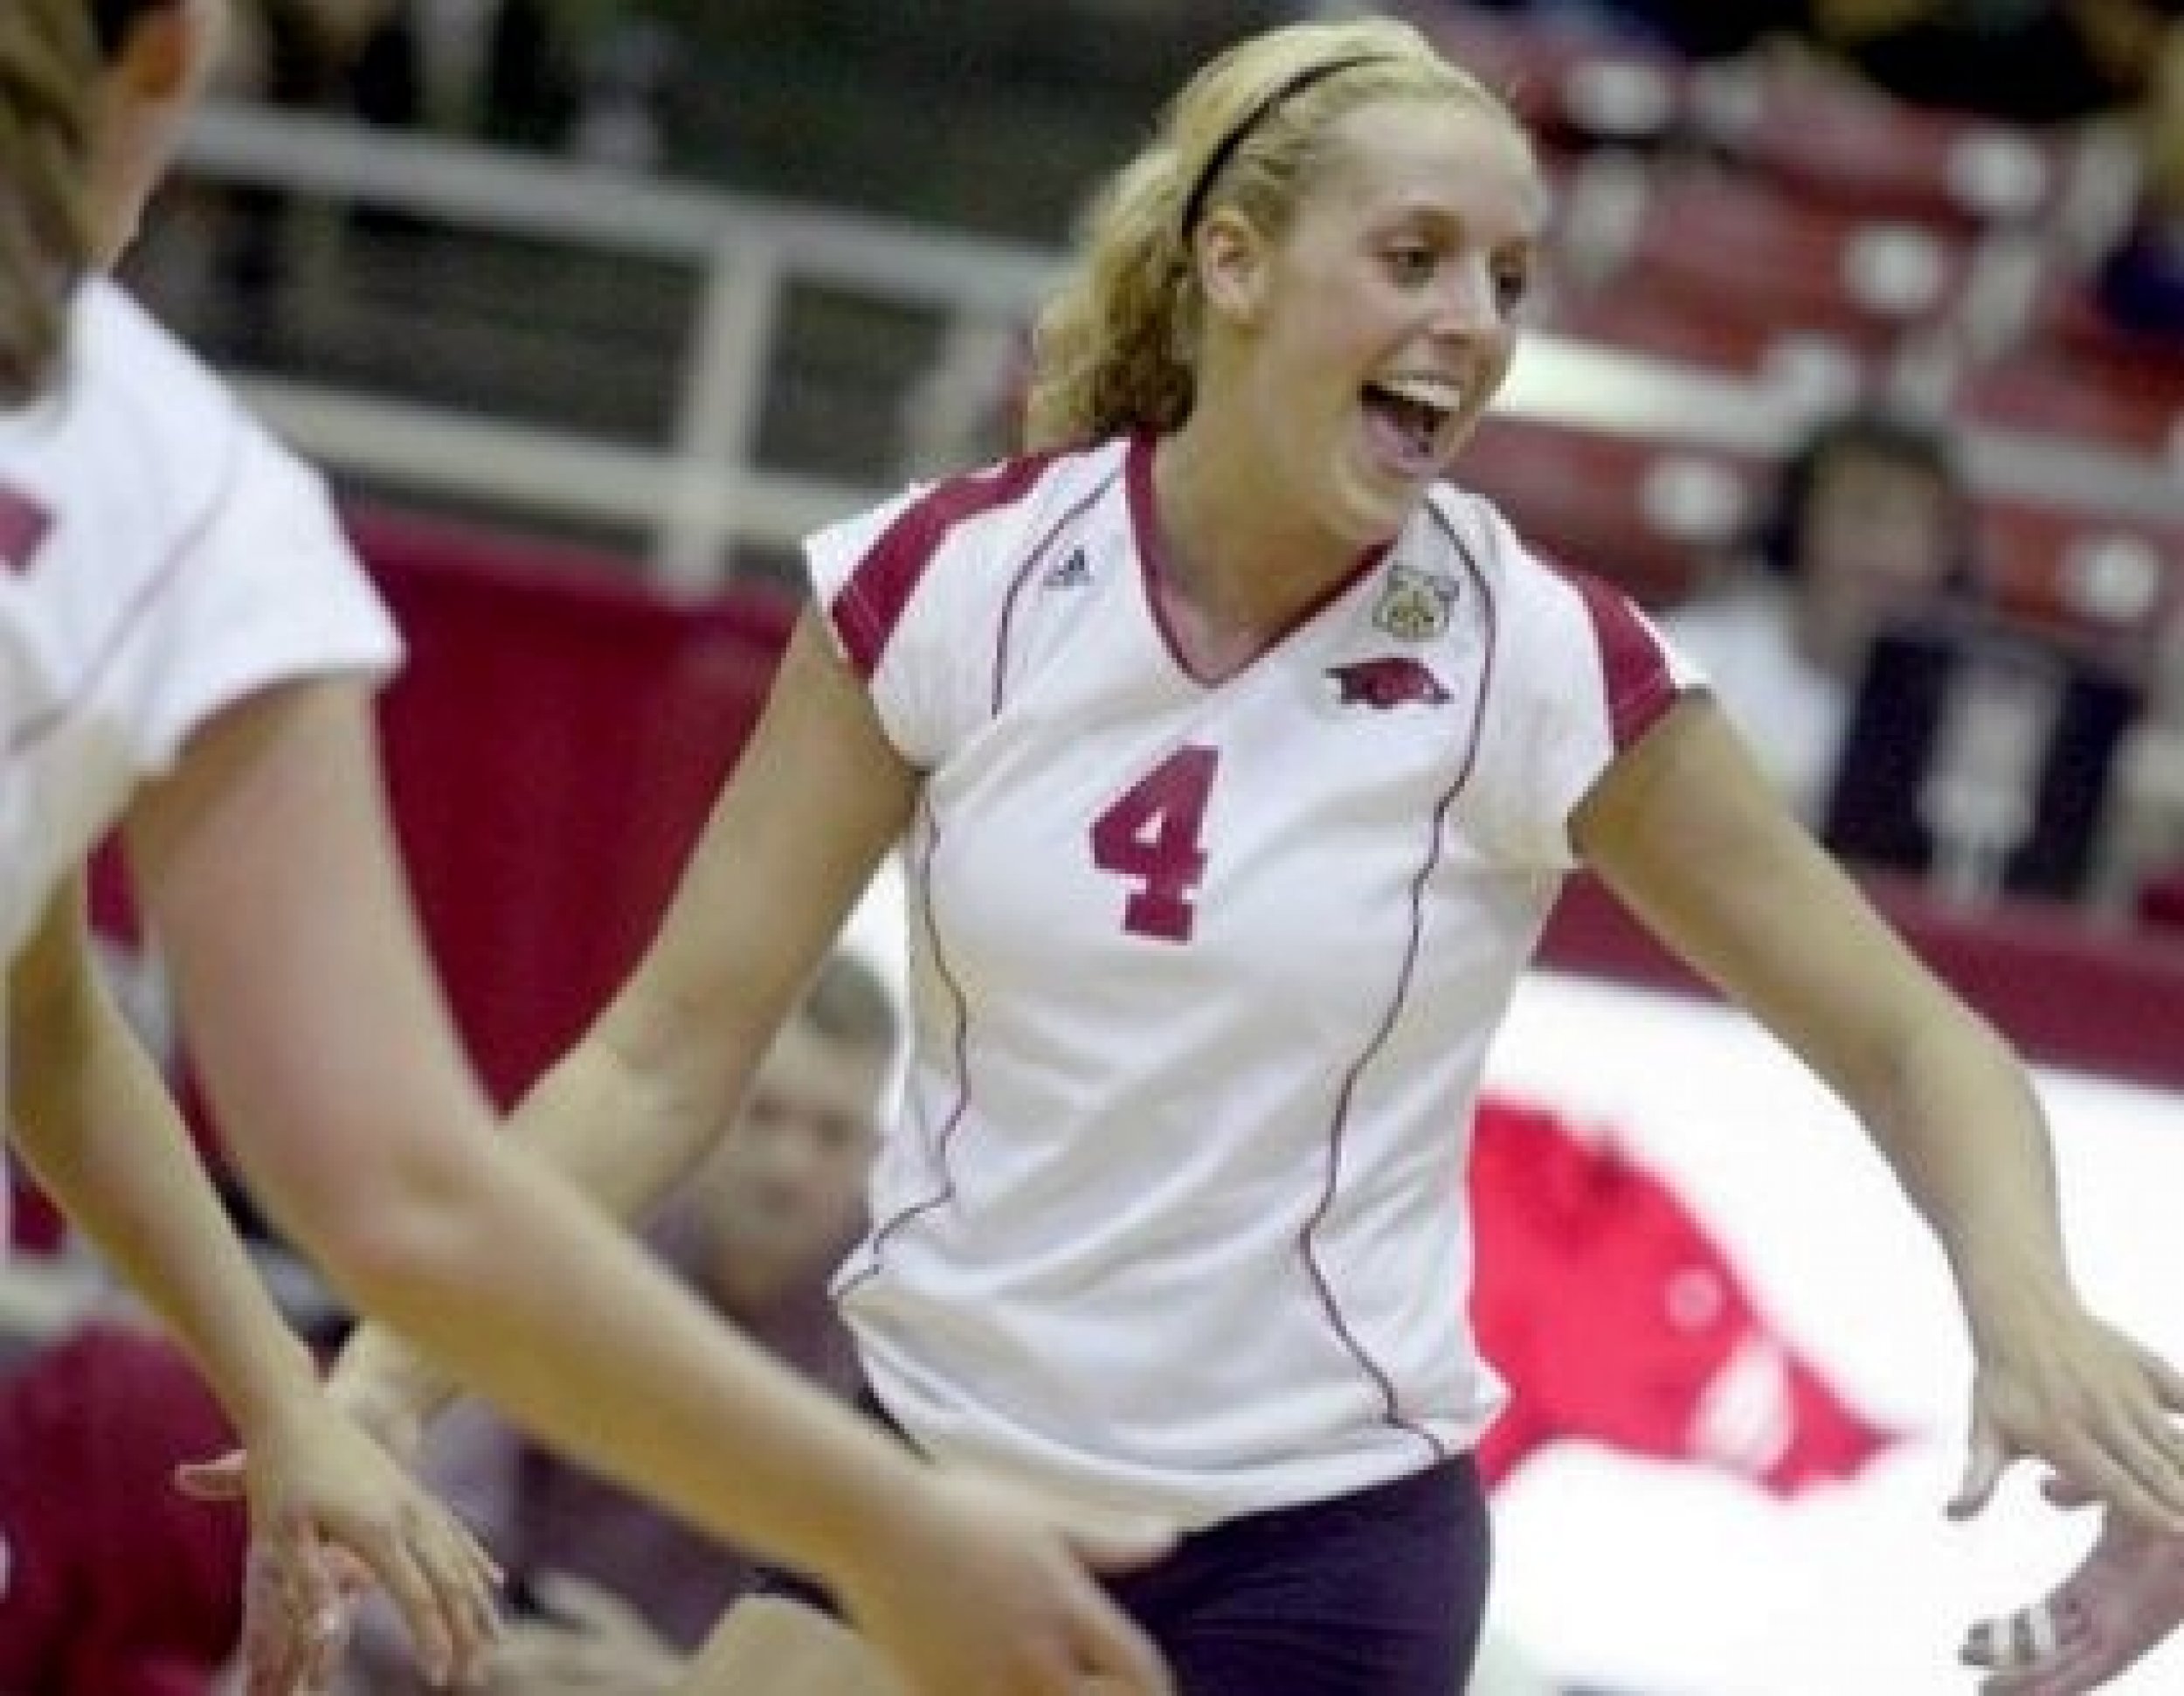 Dorrell was a member of the women039s volleyball team for the University of Arkansas.